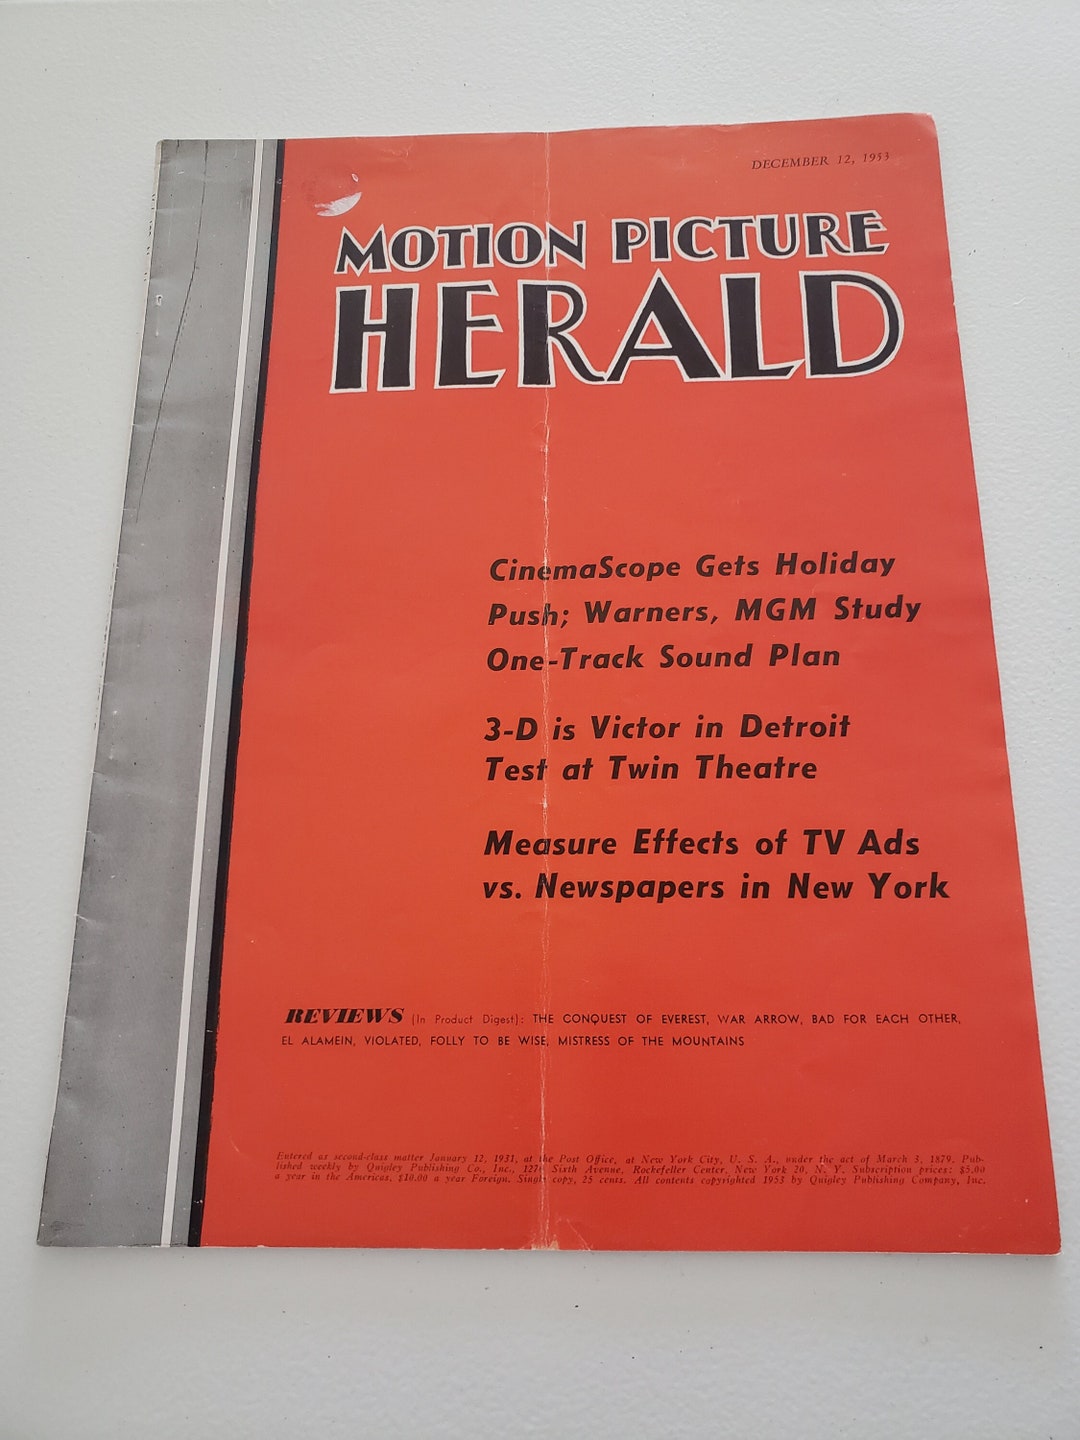 Motion Picture Herald Movie Magazine American Film Industry 1953